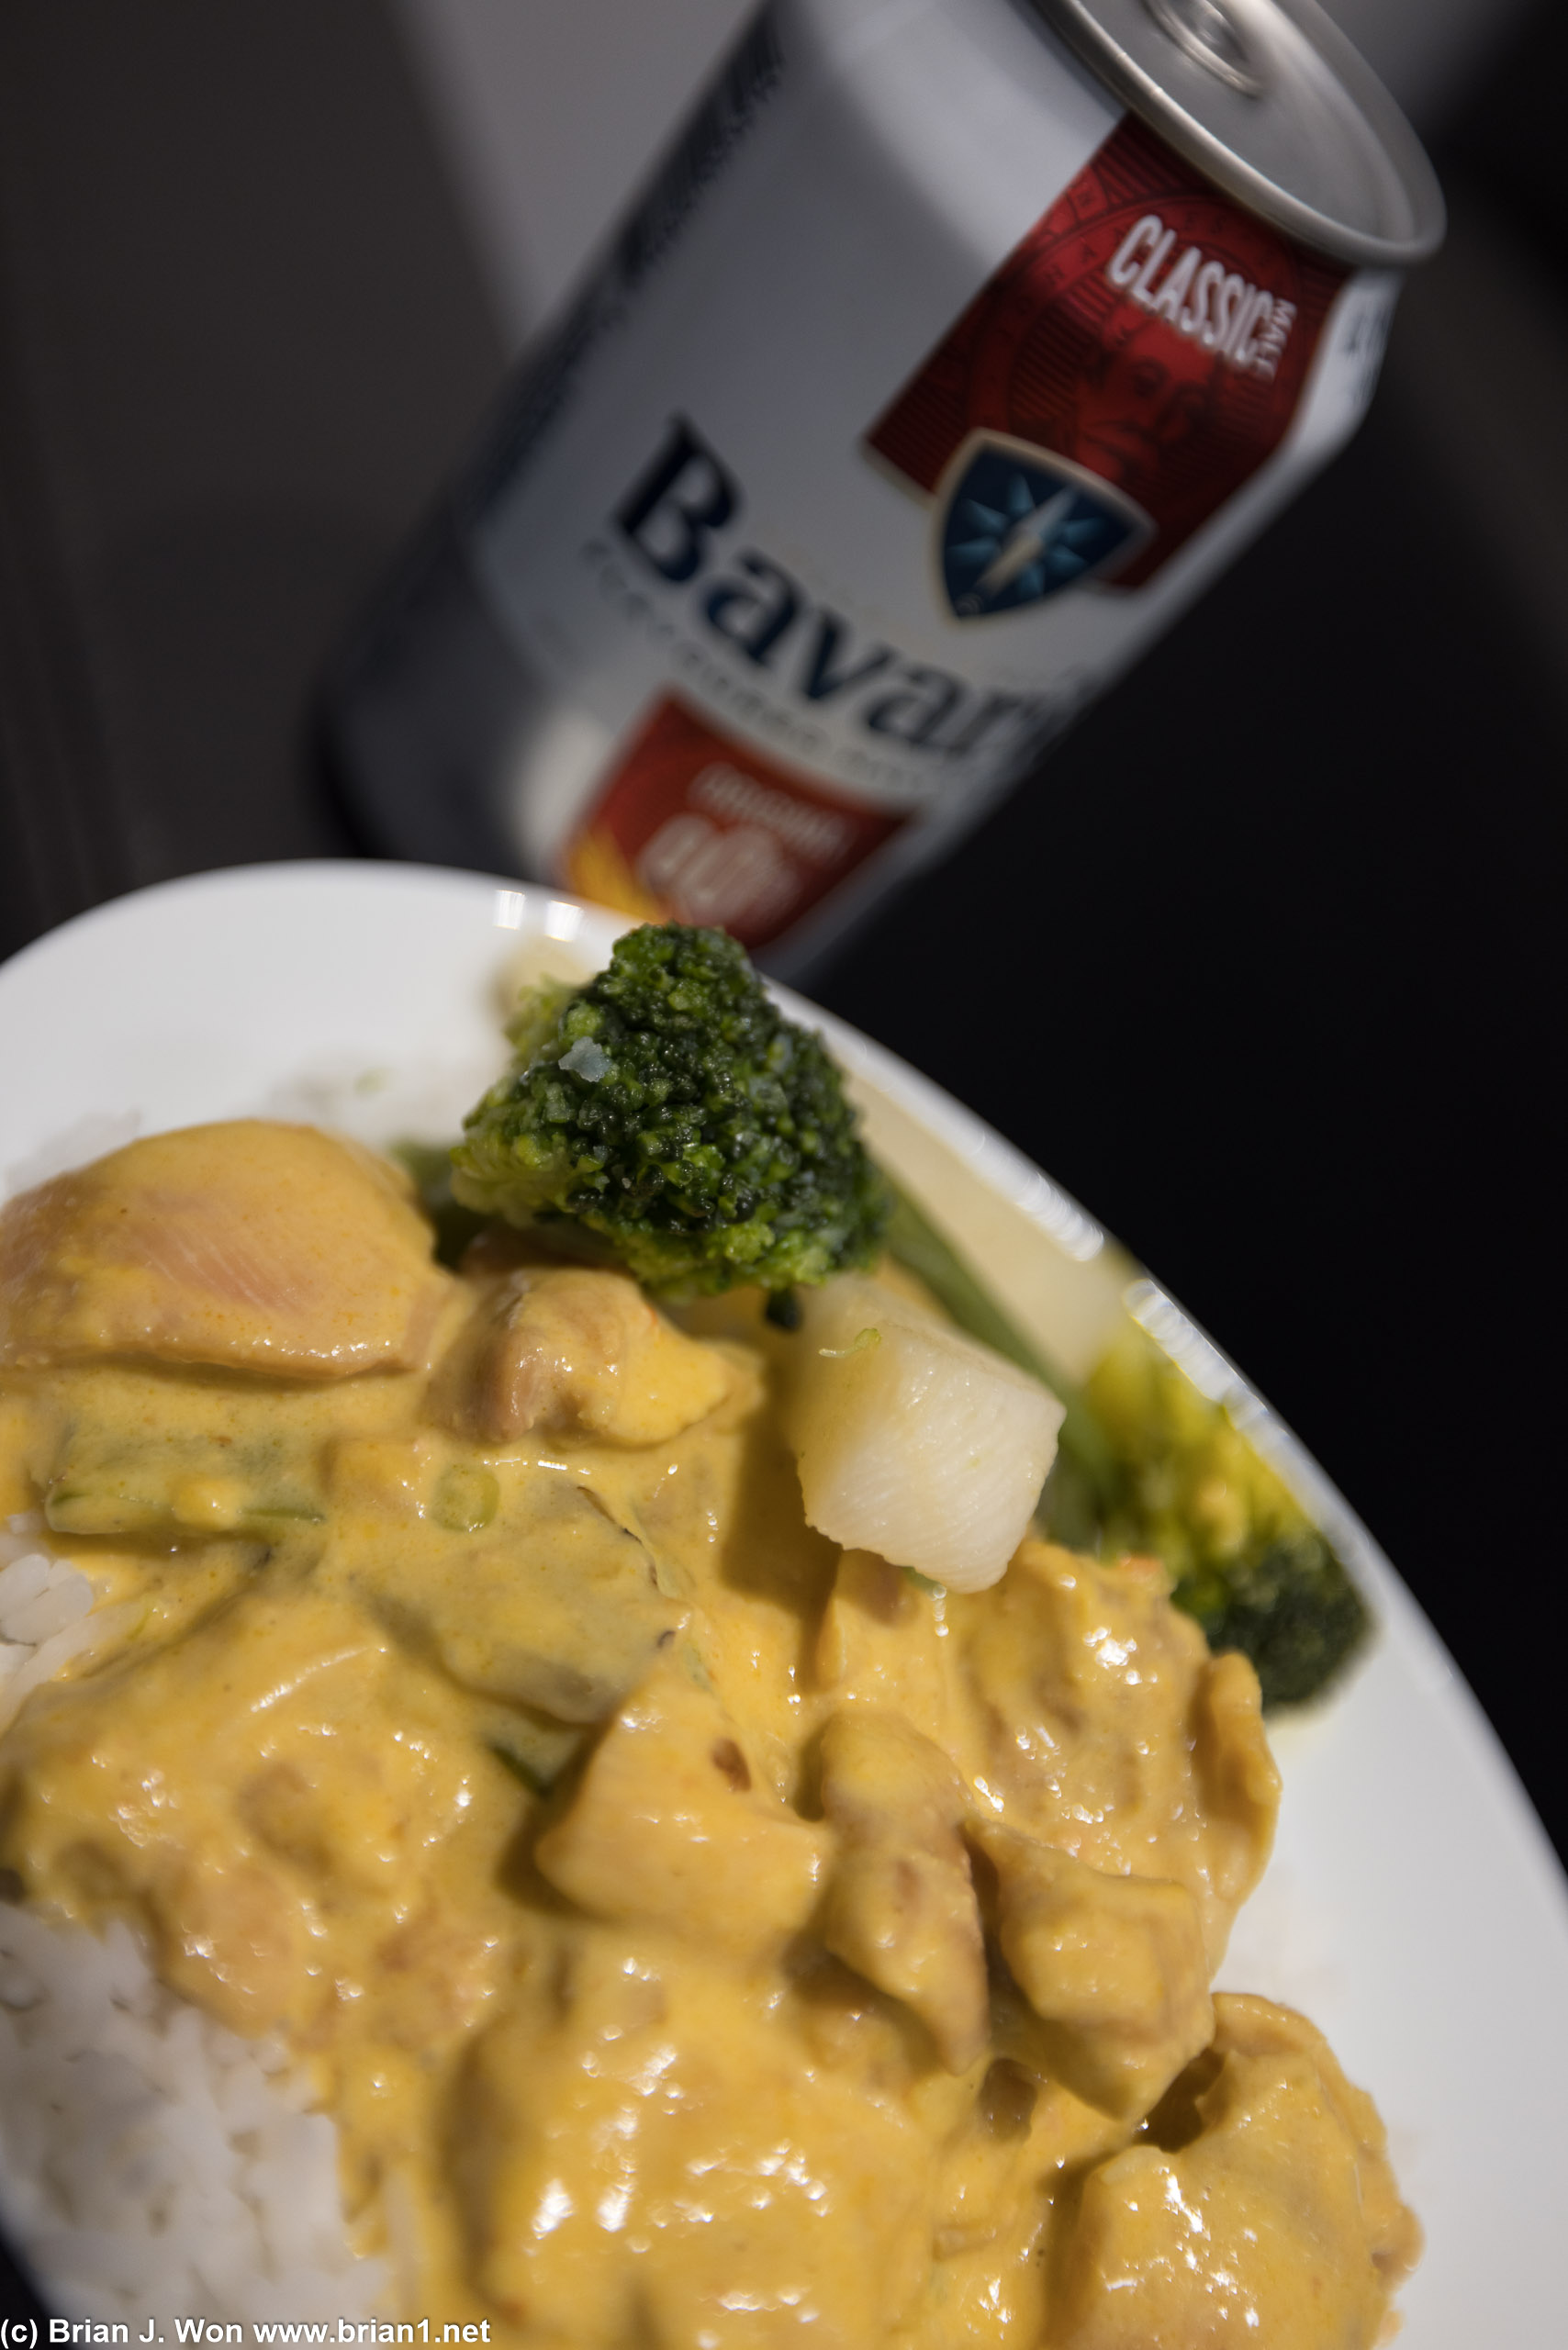 Alcohol-free beer, rice, veggies, curry chicken.